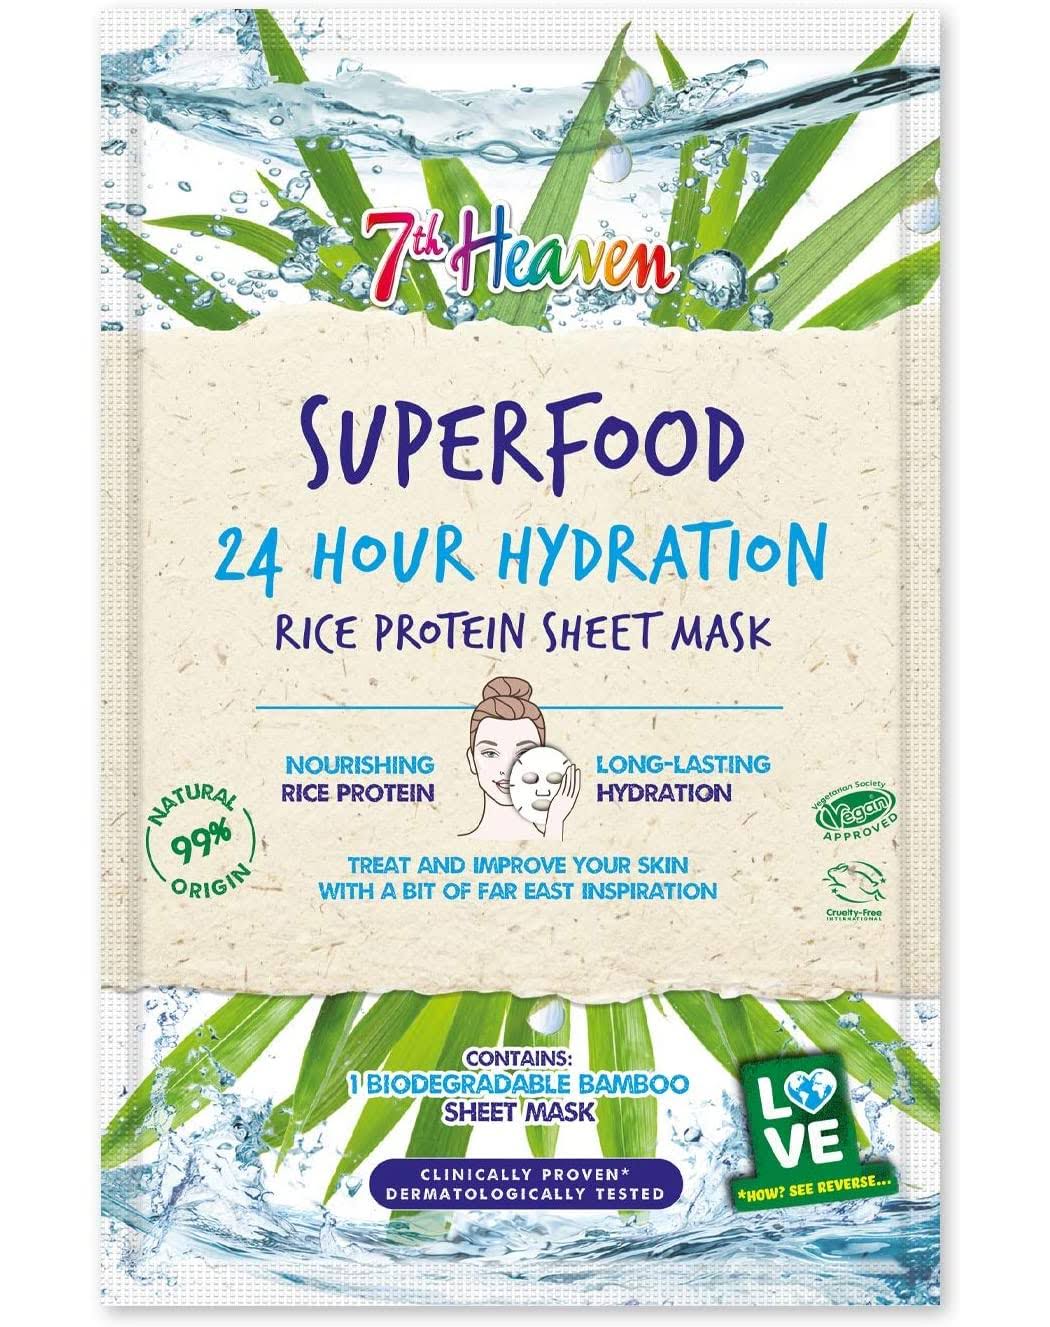 7th Heaven Superfood 24hr Hydration Rice Protein